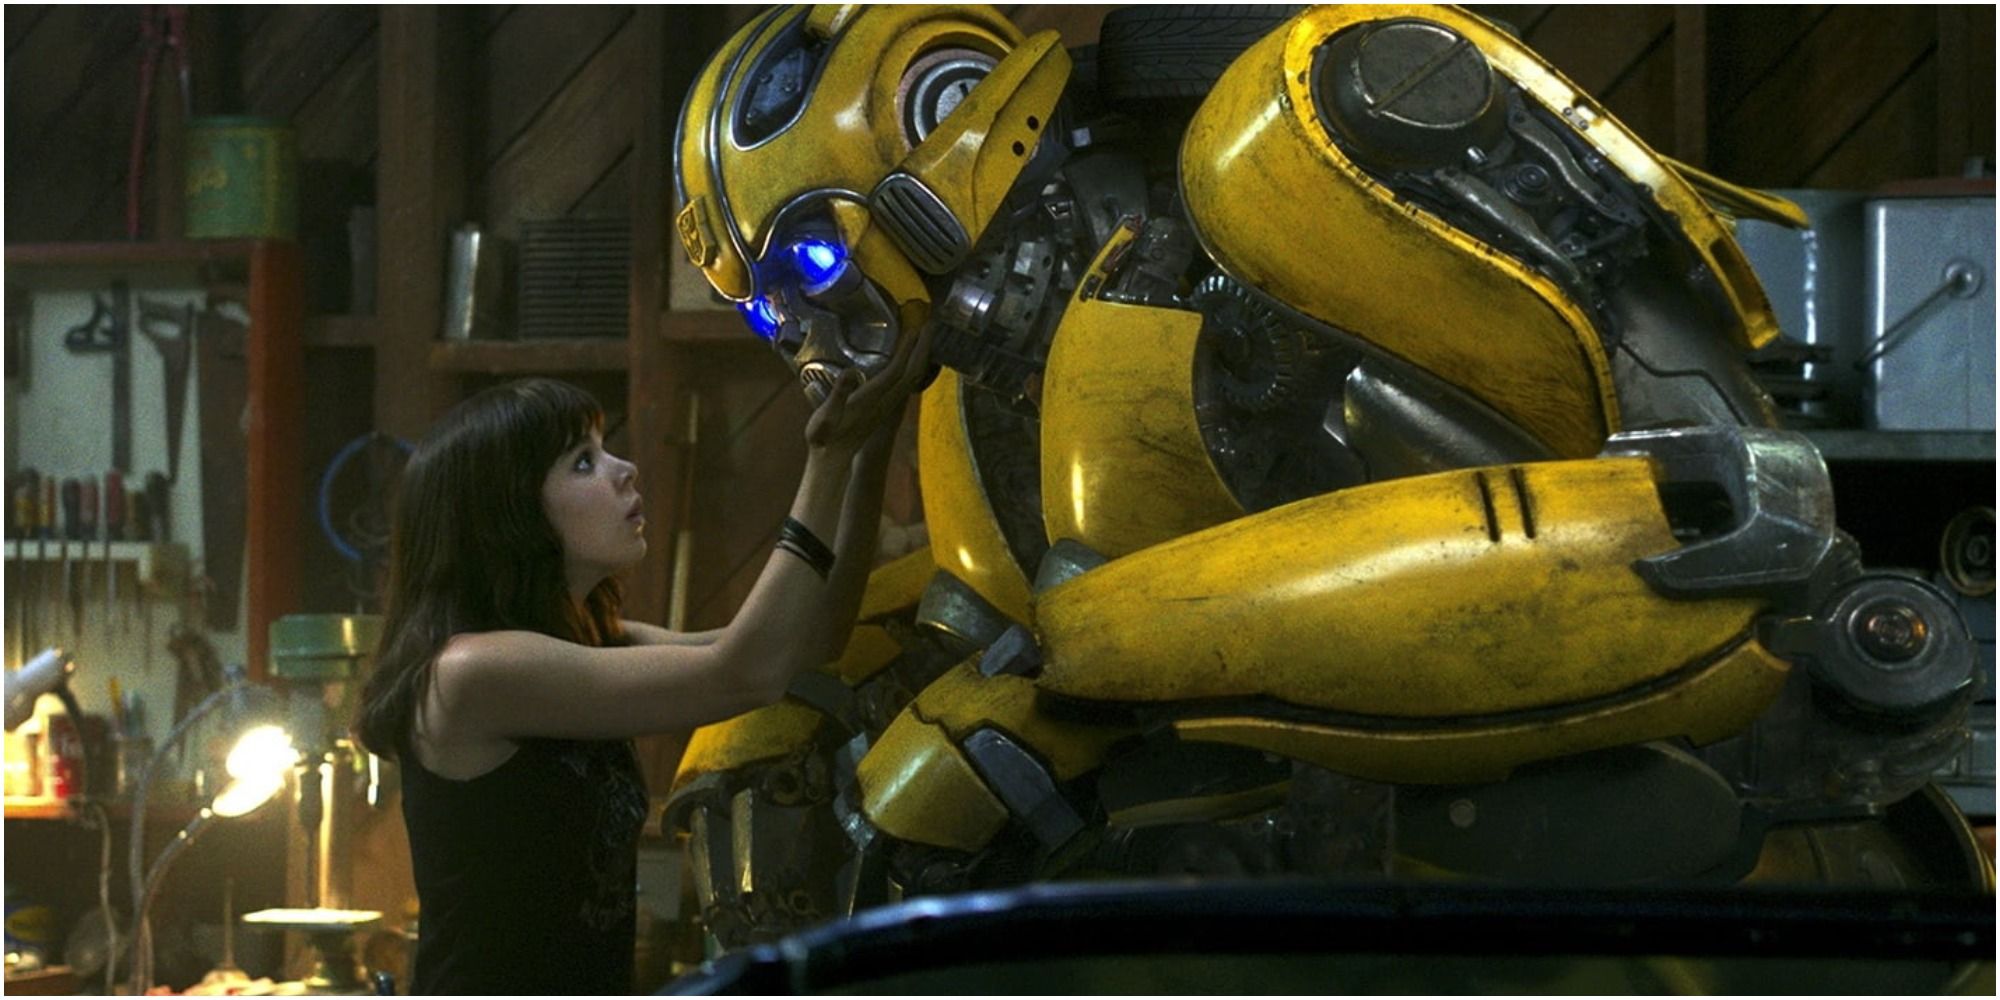 Charlie and Bumblebee in the 2018 Transformers movie Bumblebee